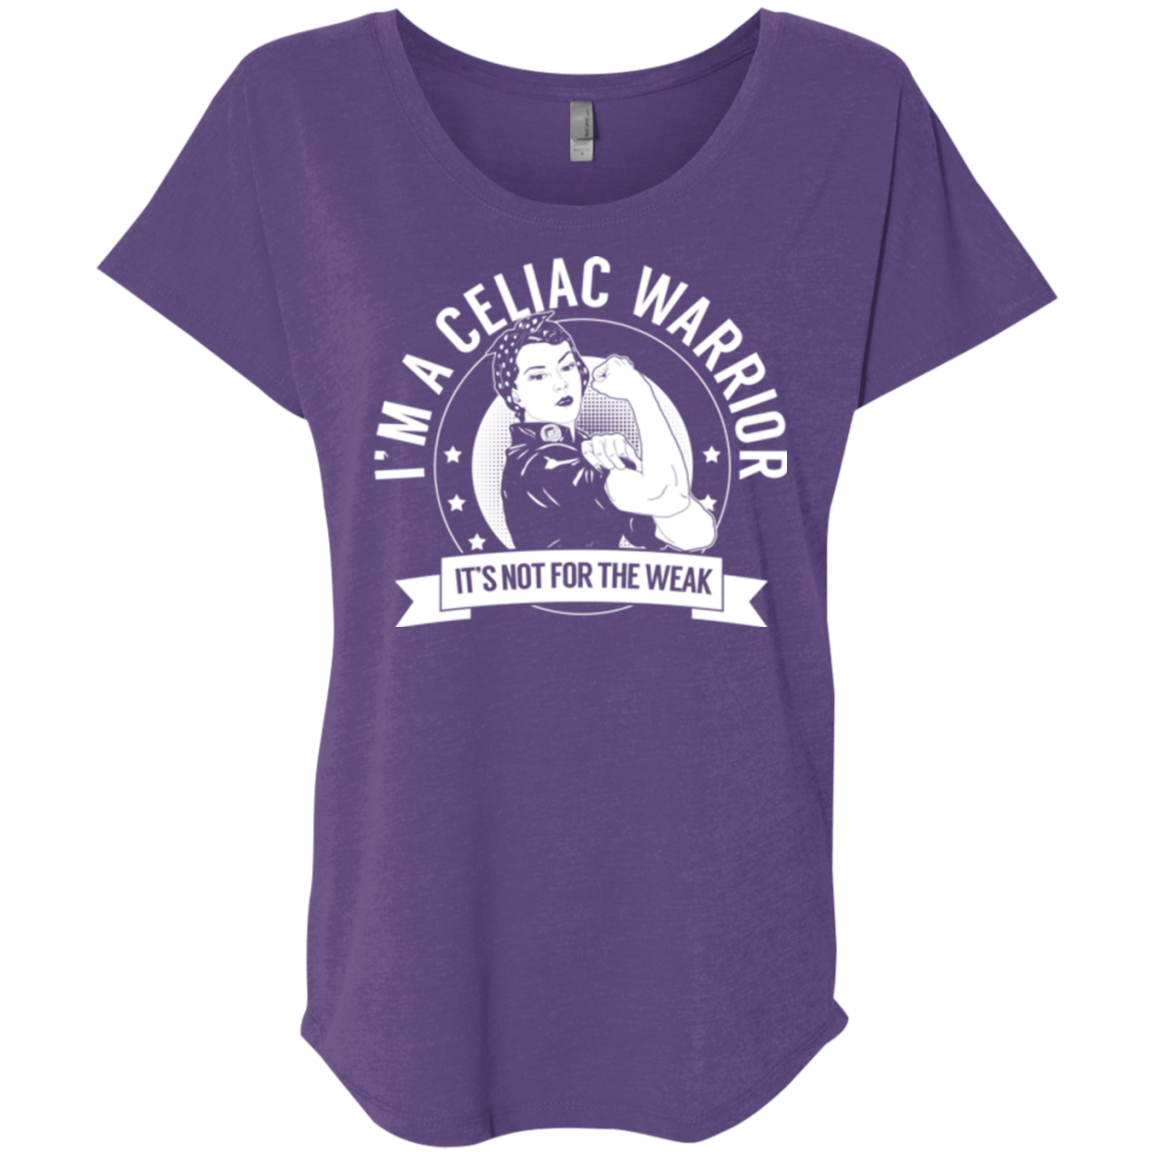 Celiac Warrior Not For The Weak Dolman Sleeve - The Unchargeables